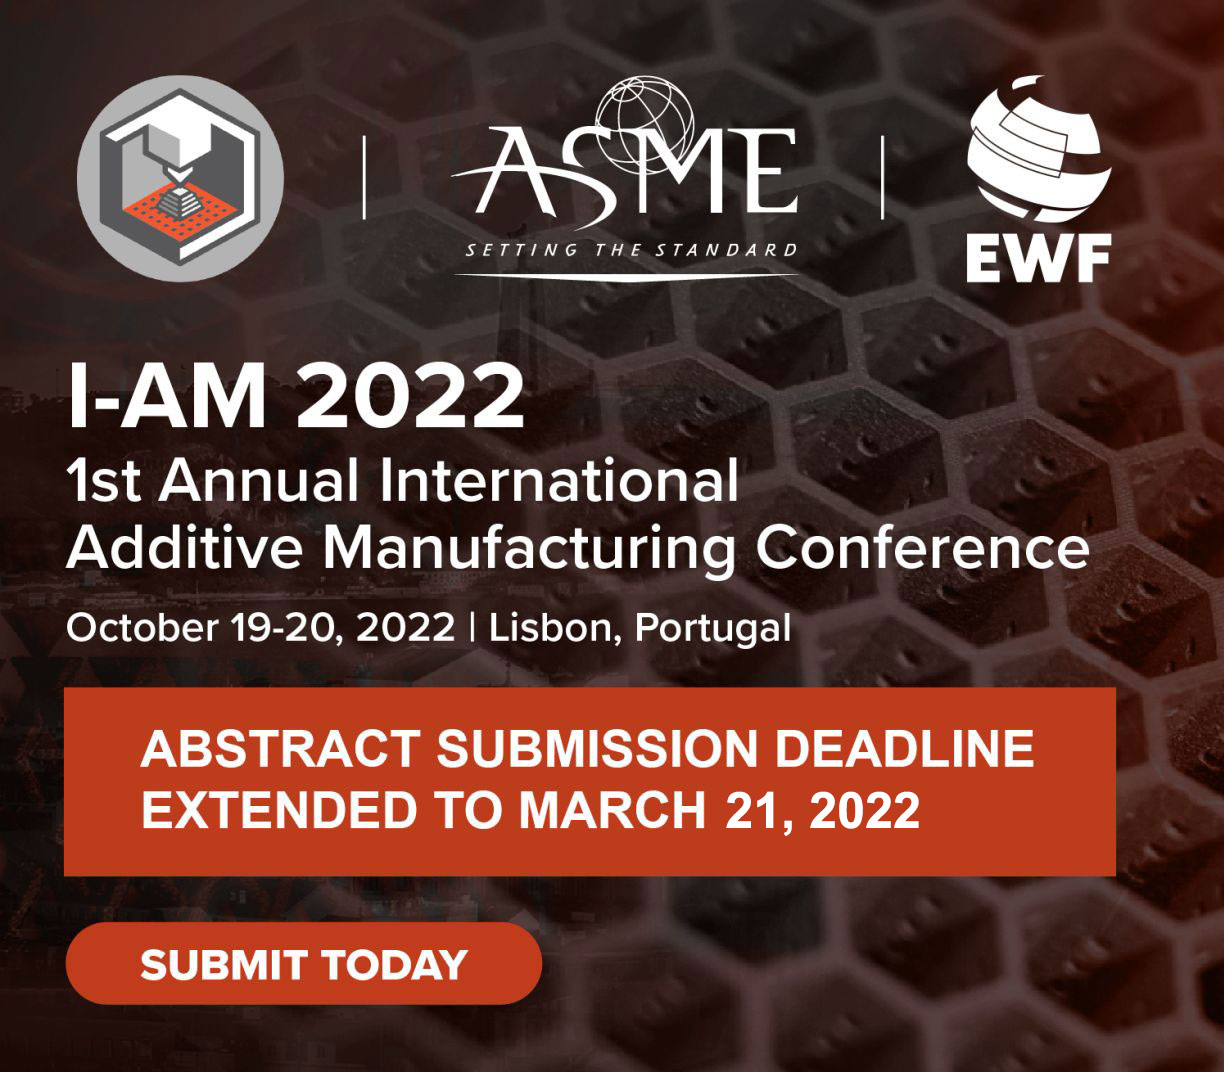 The 1st Annual International Additive Manufacturing Conference will take place 19-20th October 2022. Image via EWF.